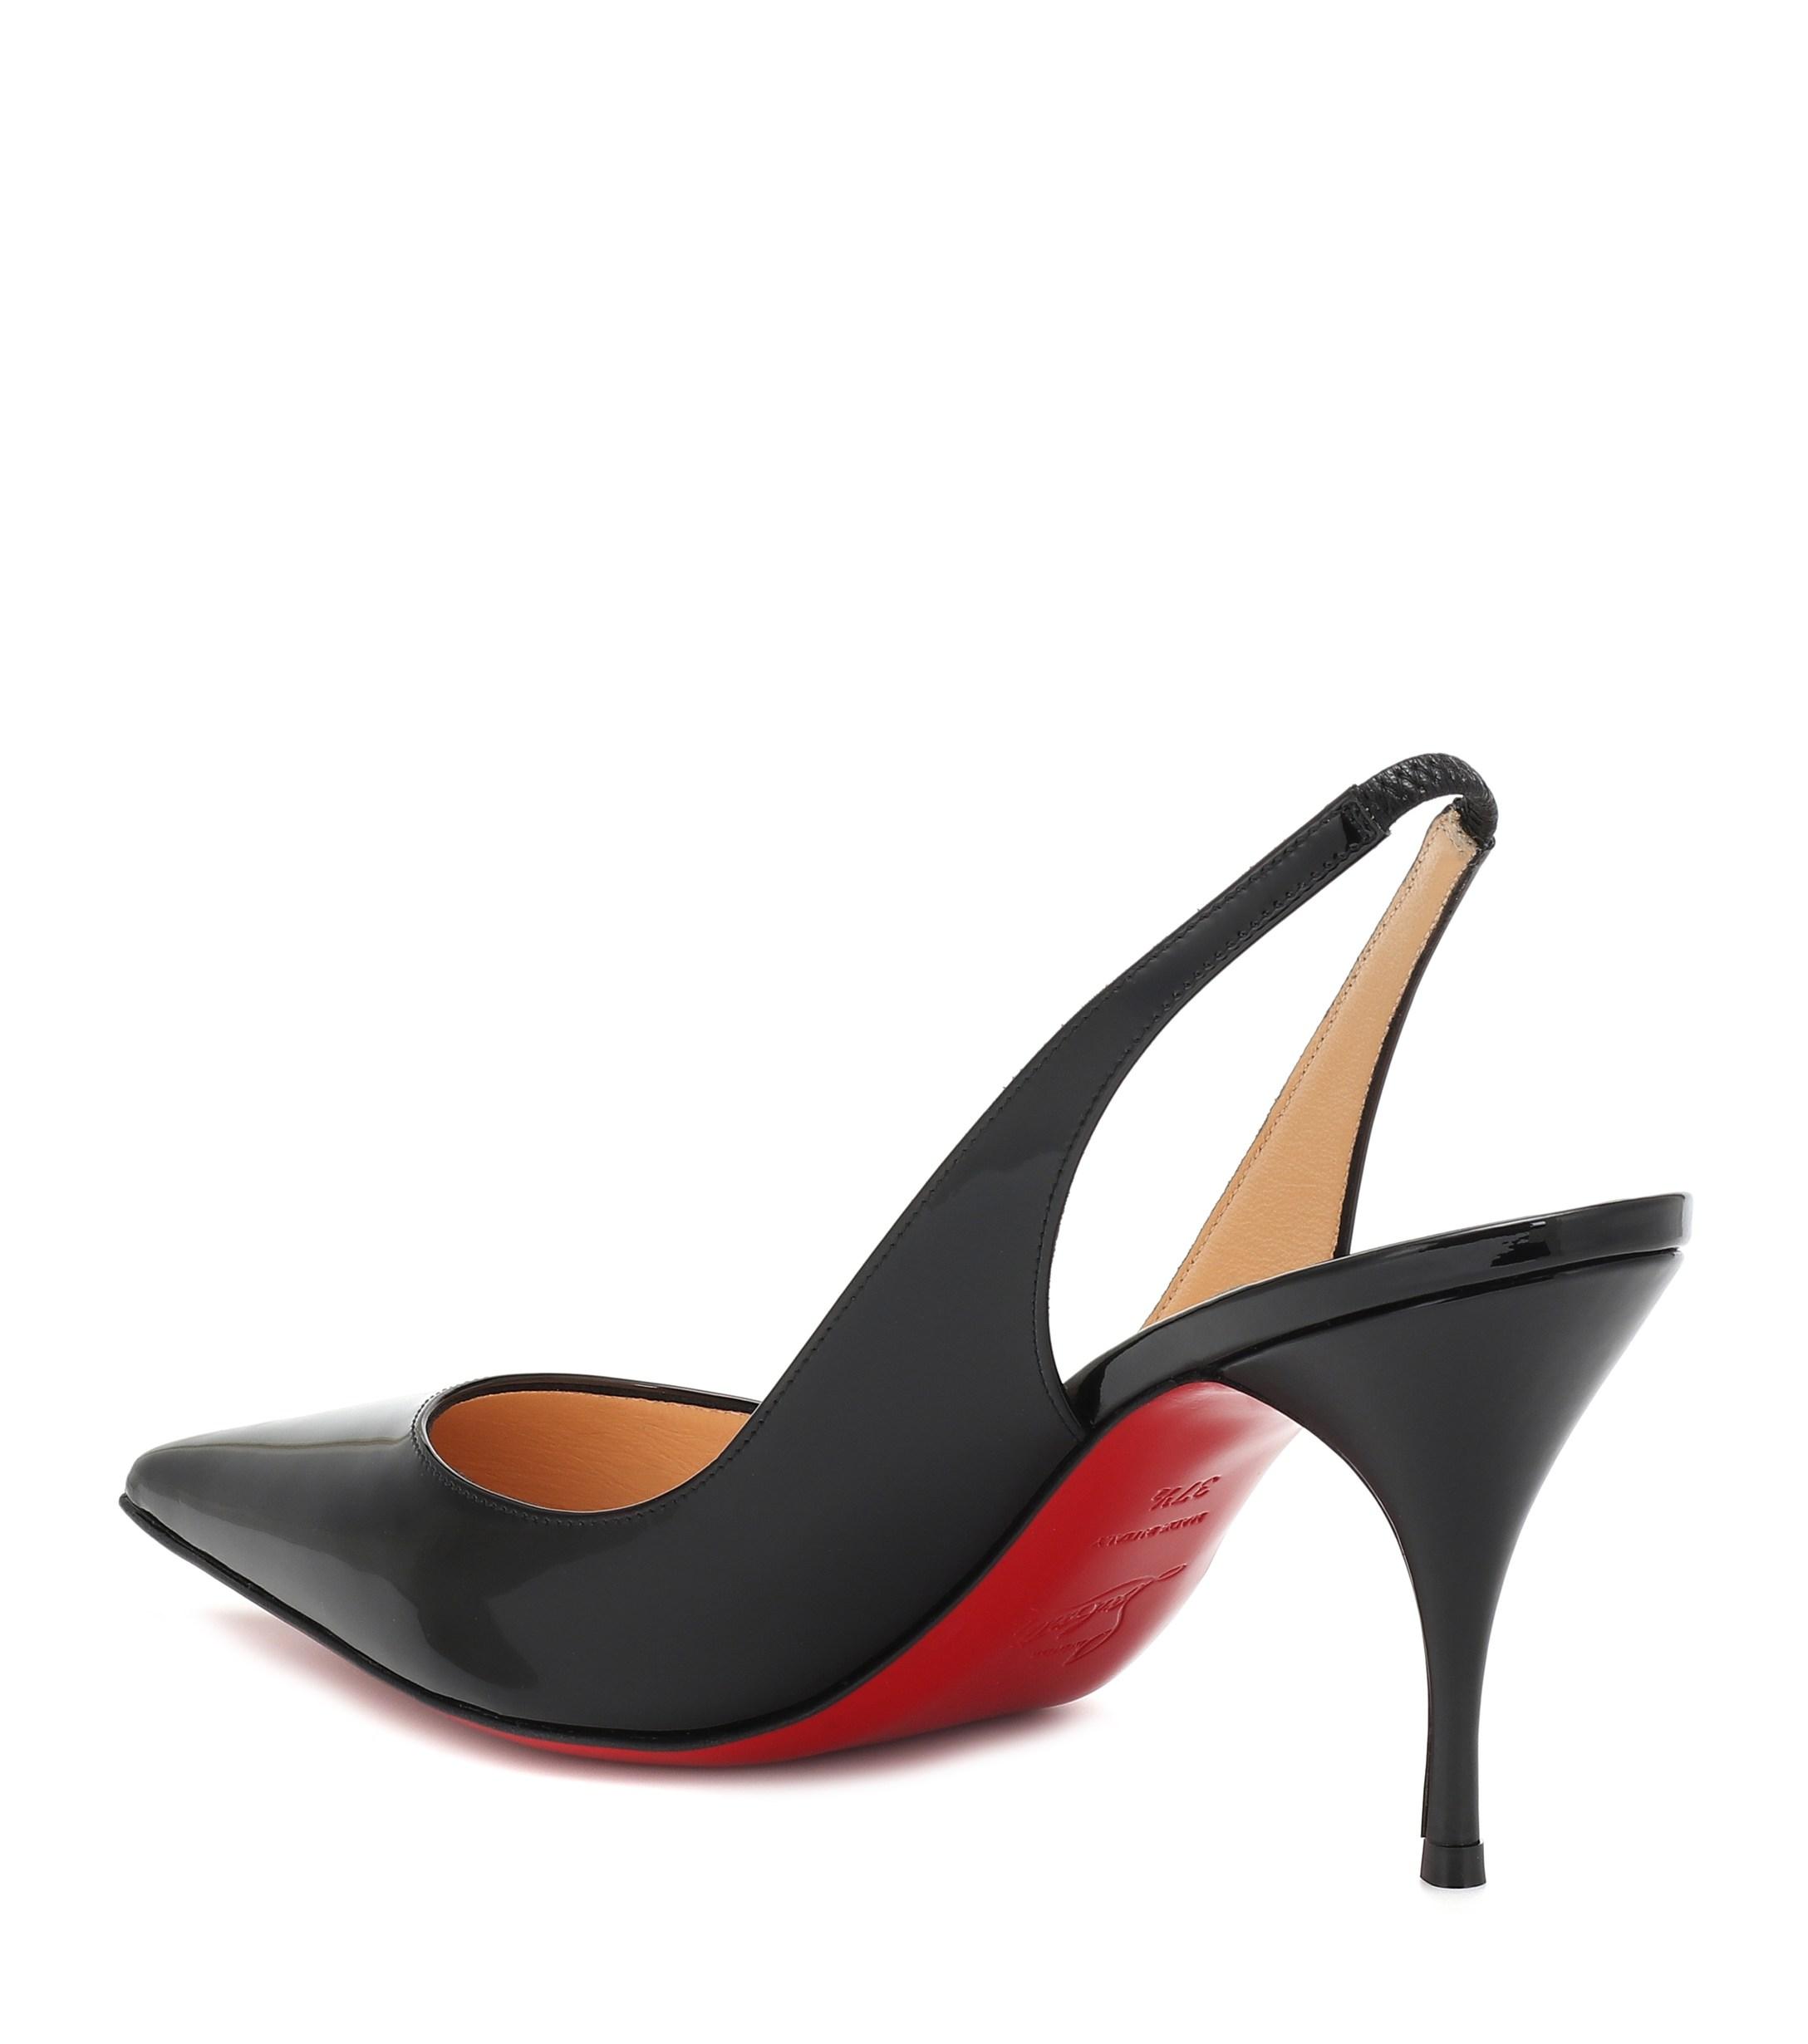 Christian Louboutin Clare Sling 80 Patent Leather Pumps in Black - Lyst